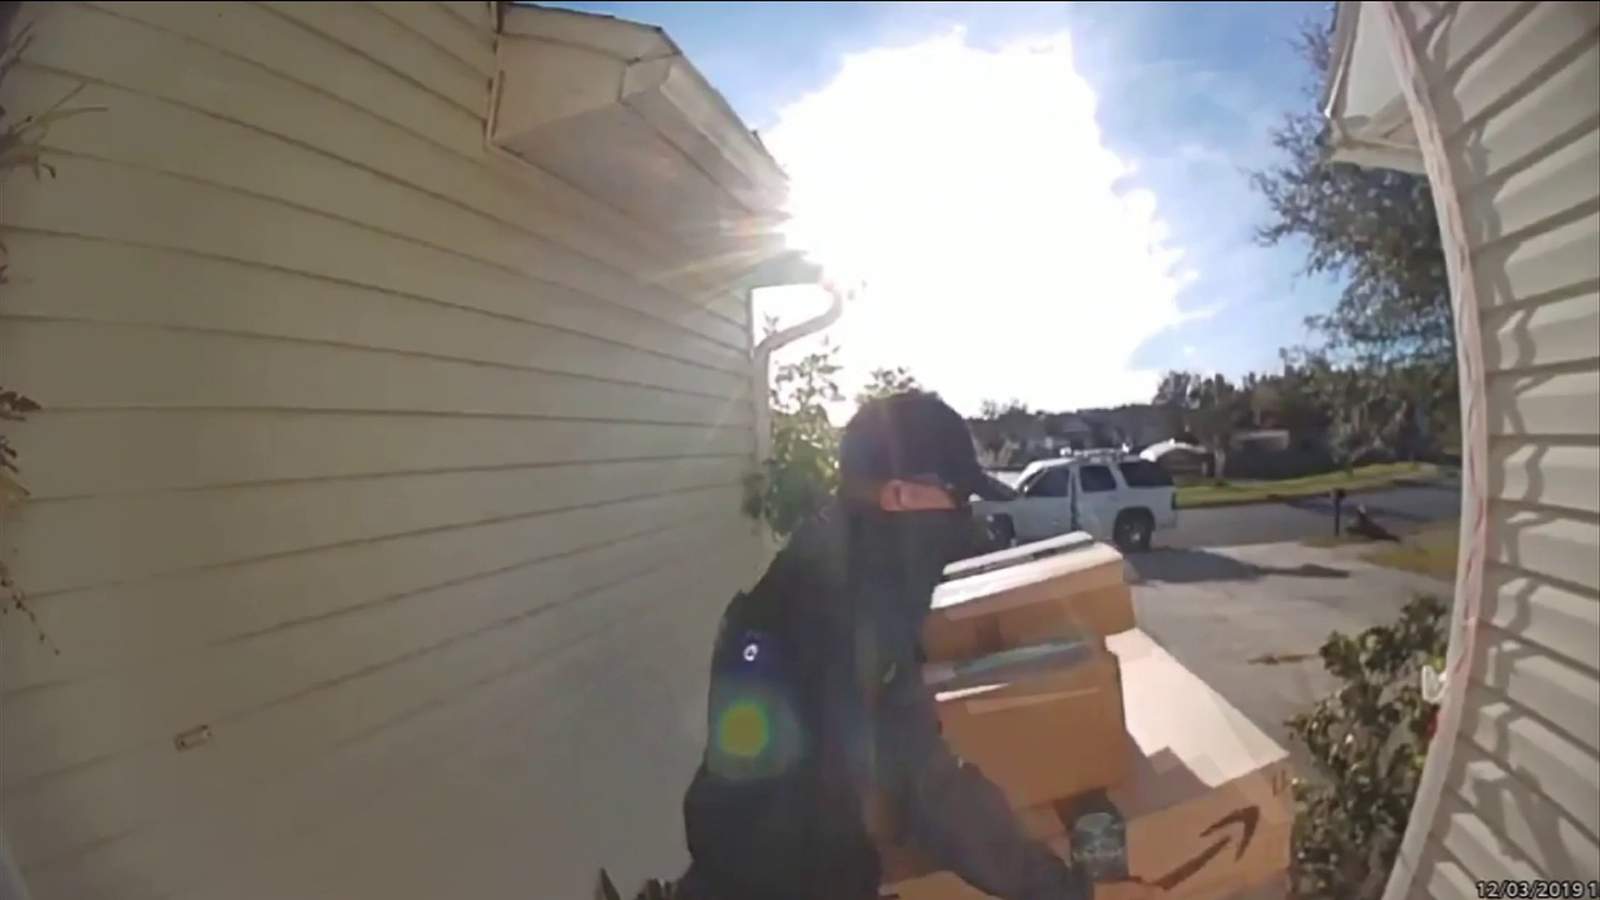 Troubles reporting porch pirate problems